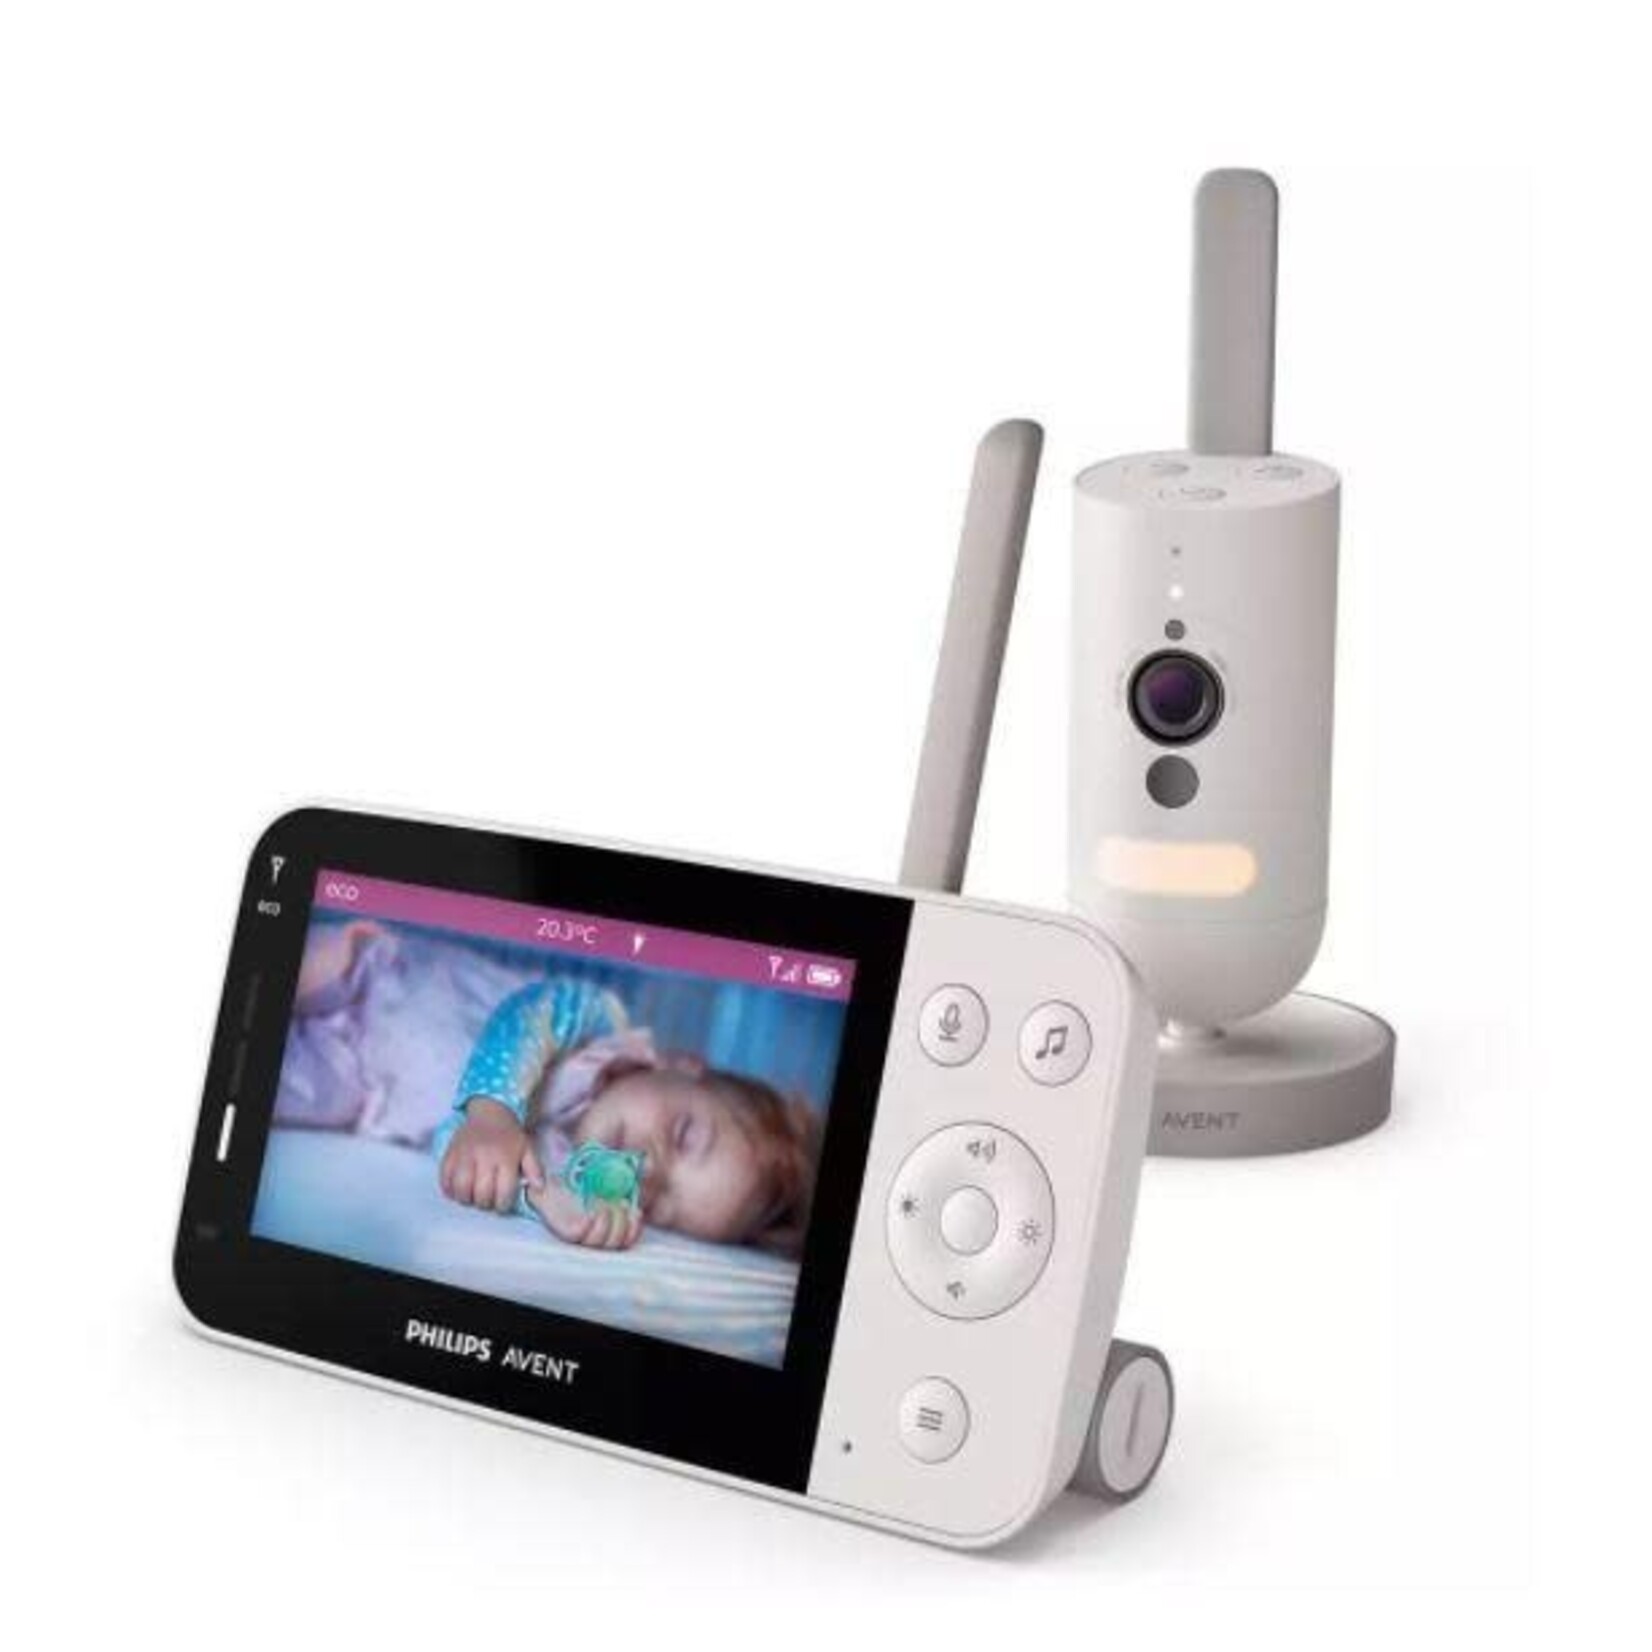 Philips-Avent Philips-Avent - Videofoon Ouder + Wifi